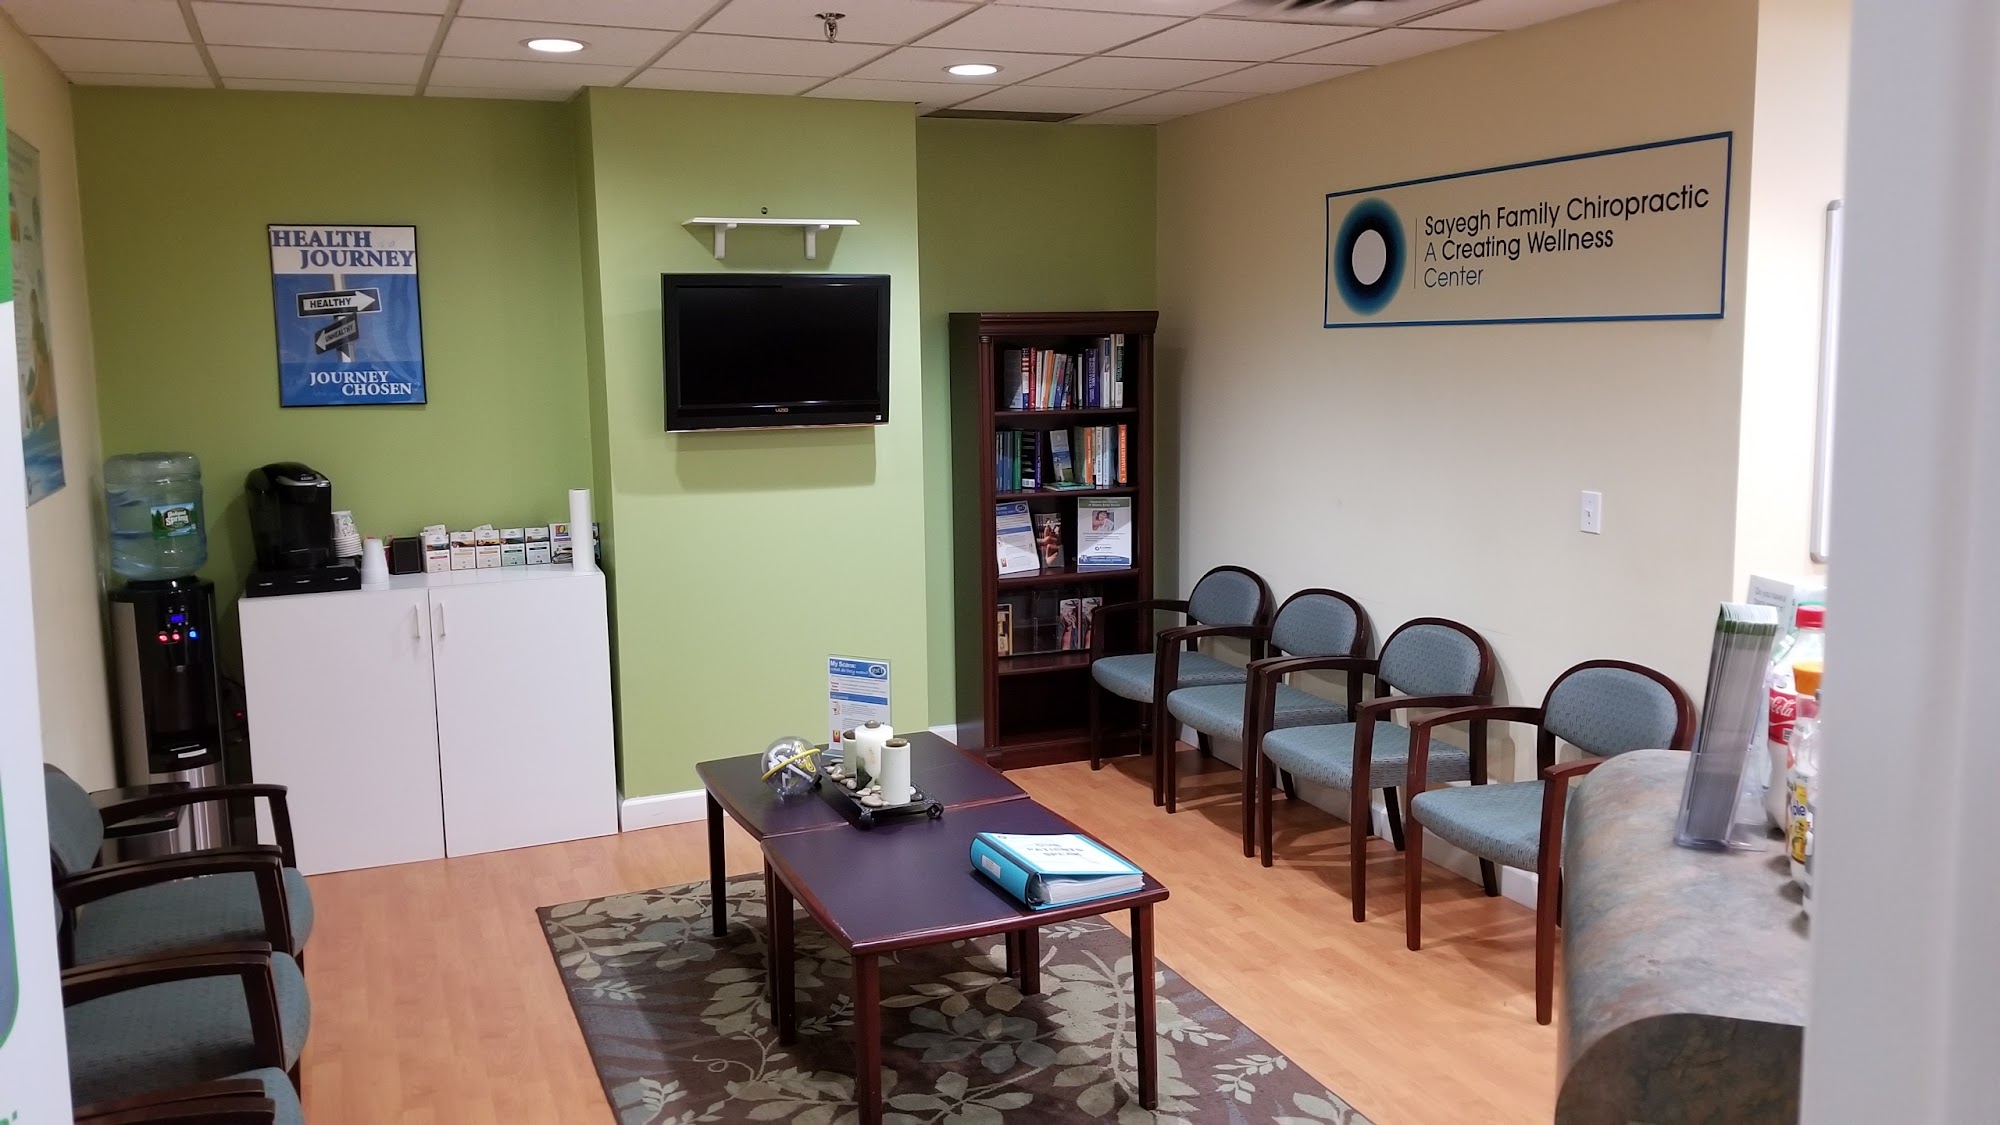 Sayegh Family Chiropractic: A Creating Wellness Center